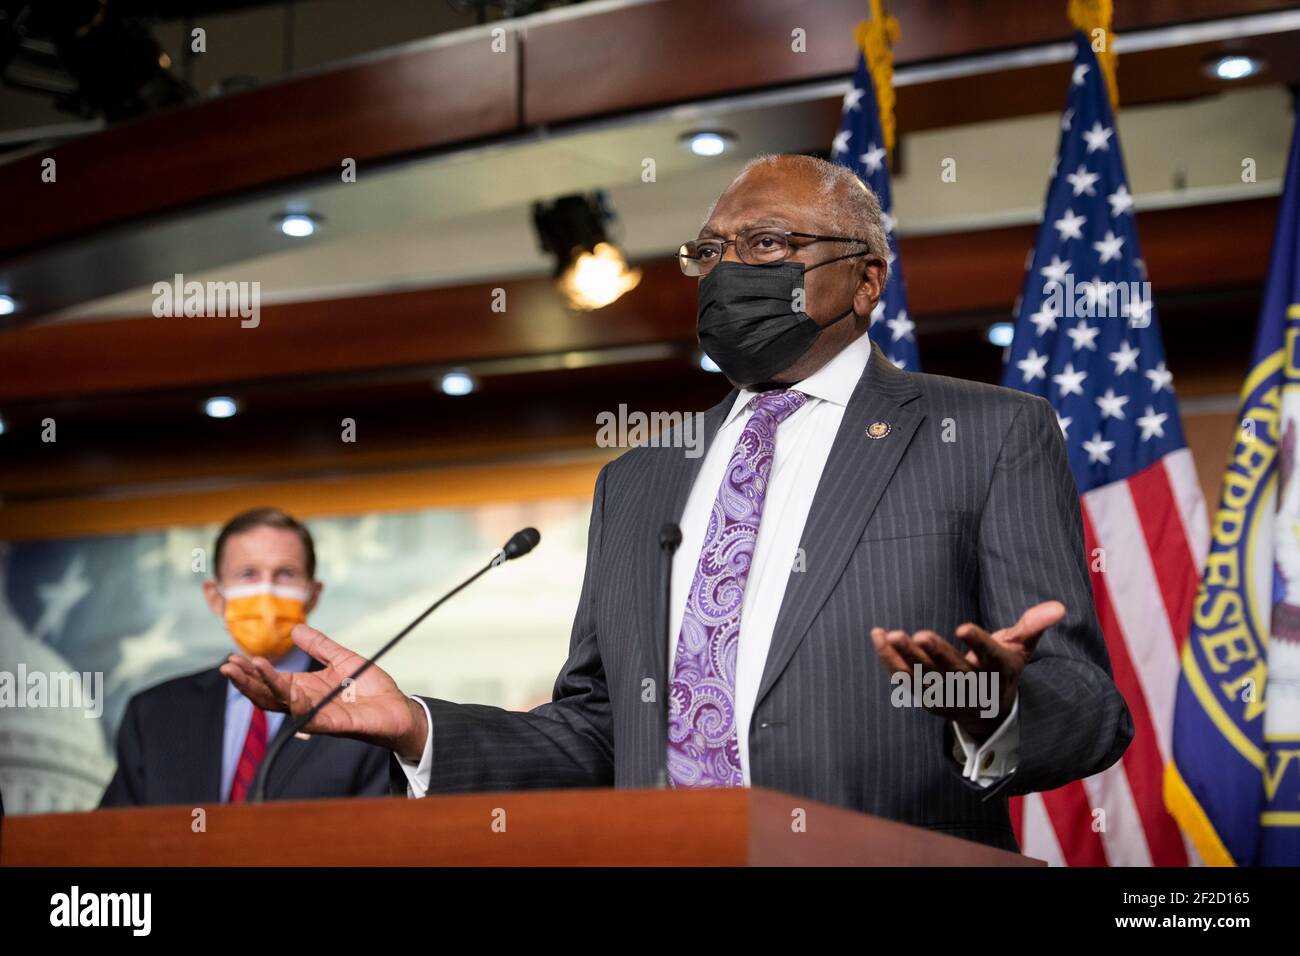 United States House Majority Whip James Clyburn (Democrat of South Carolina) offers remarks during a press conference on passage of gun violence prevention legislation at the U.S. Capitol in Washington, DC, Thursday, March 11, 2021. Credit: Rod Lamkey/CNP /MediaPunch Stock Photo